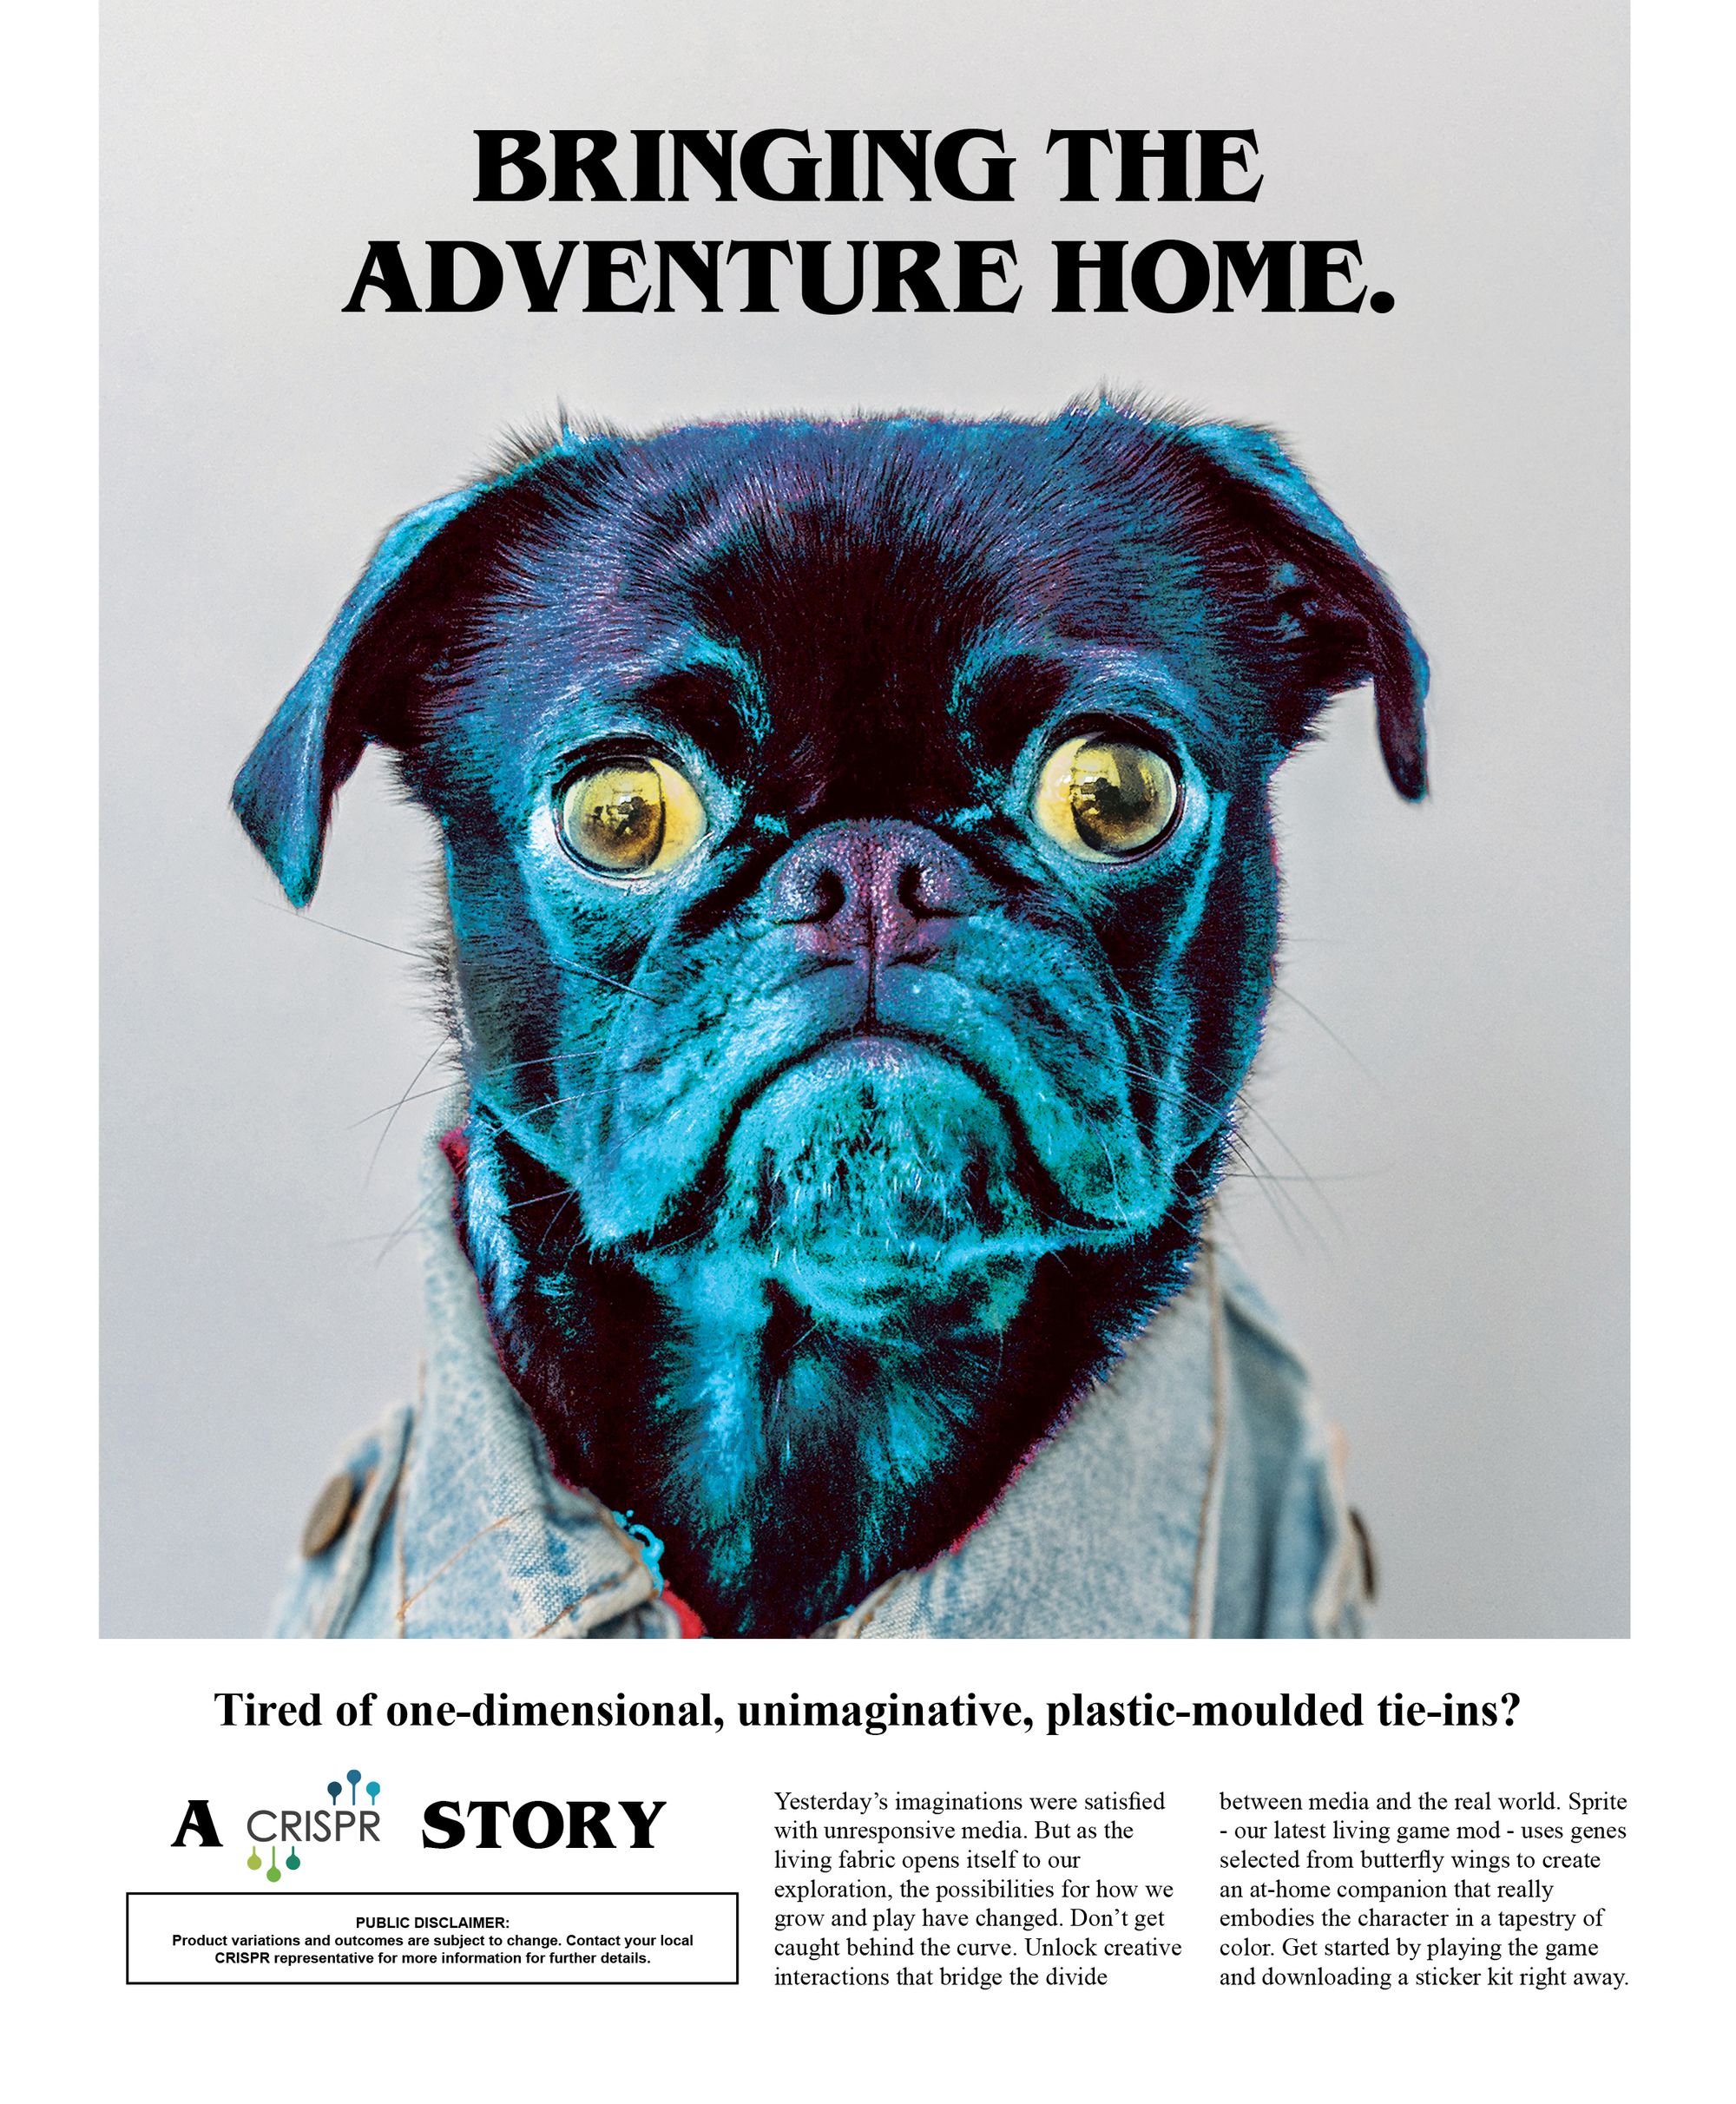 An ad with a technicolor photo of a pug staring straight at the reader, with text "Bringing the adventure home." at the top.